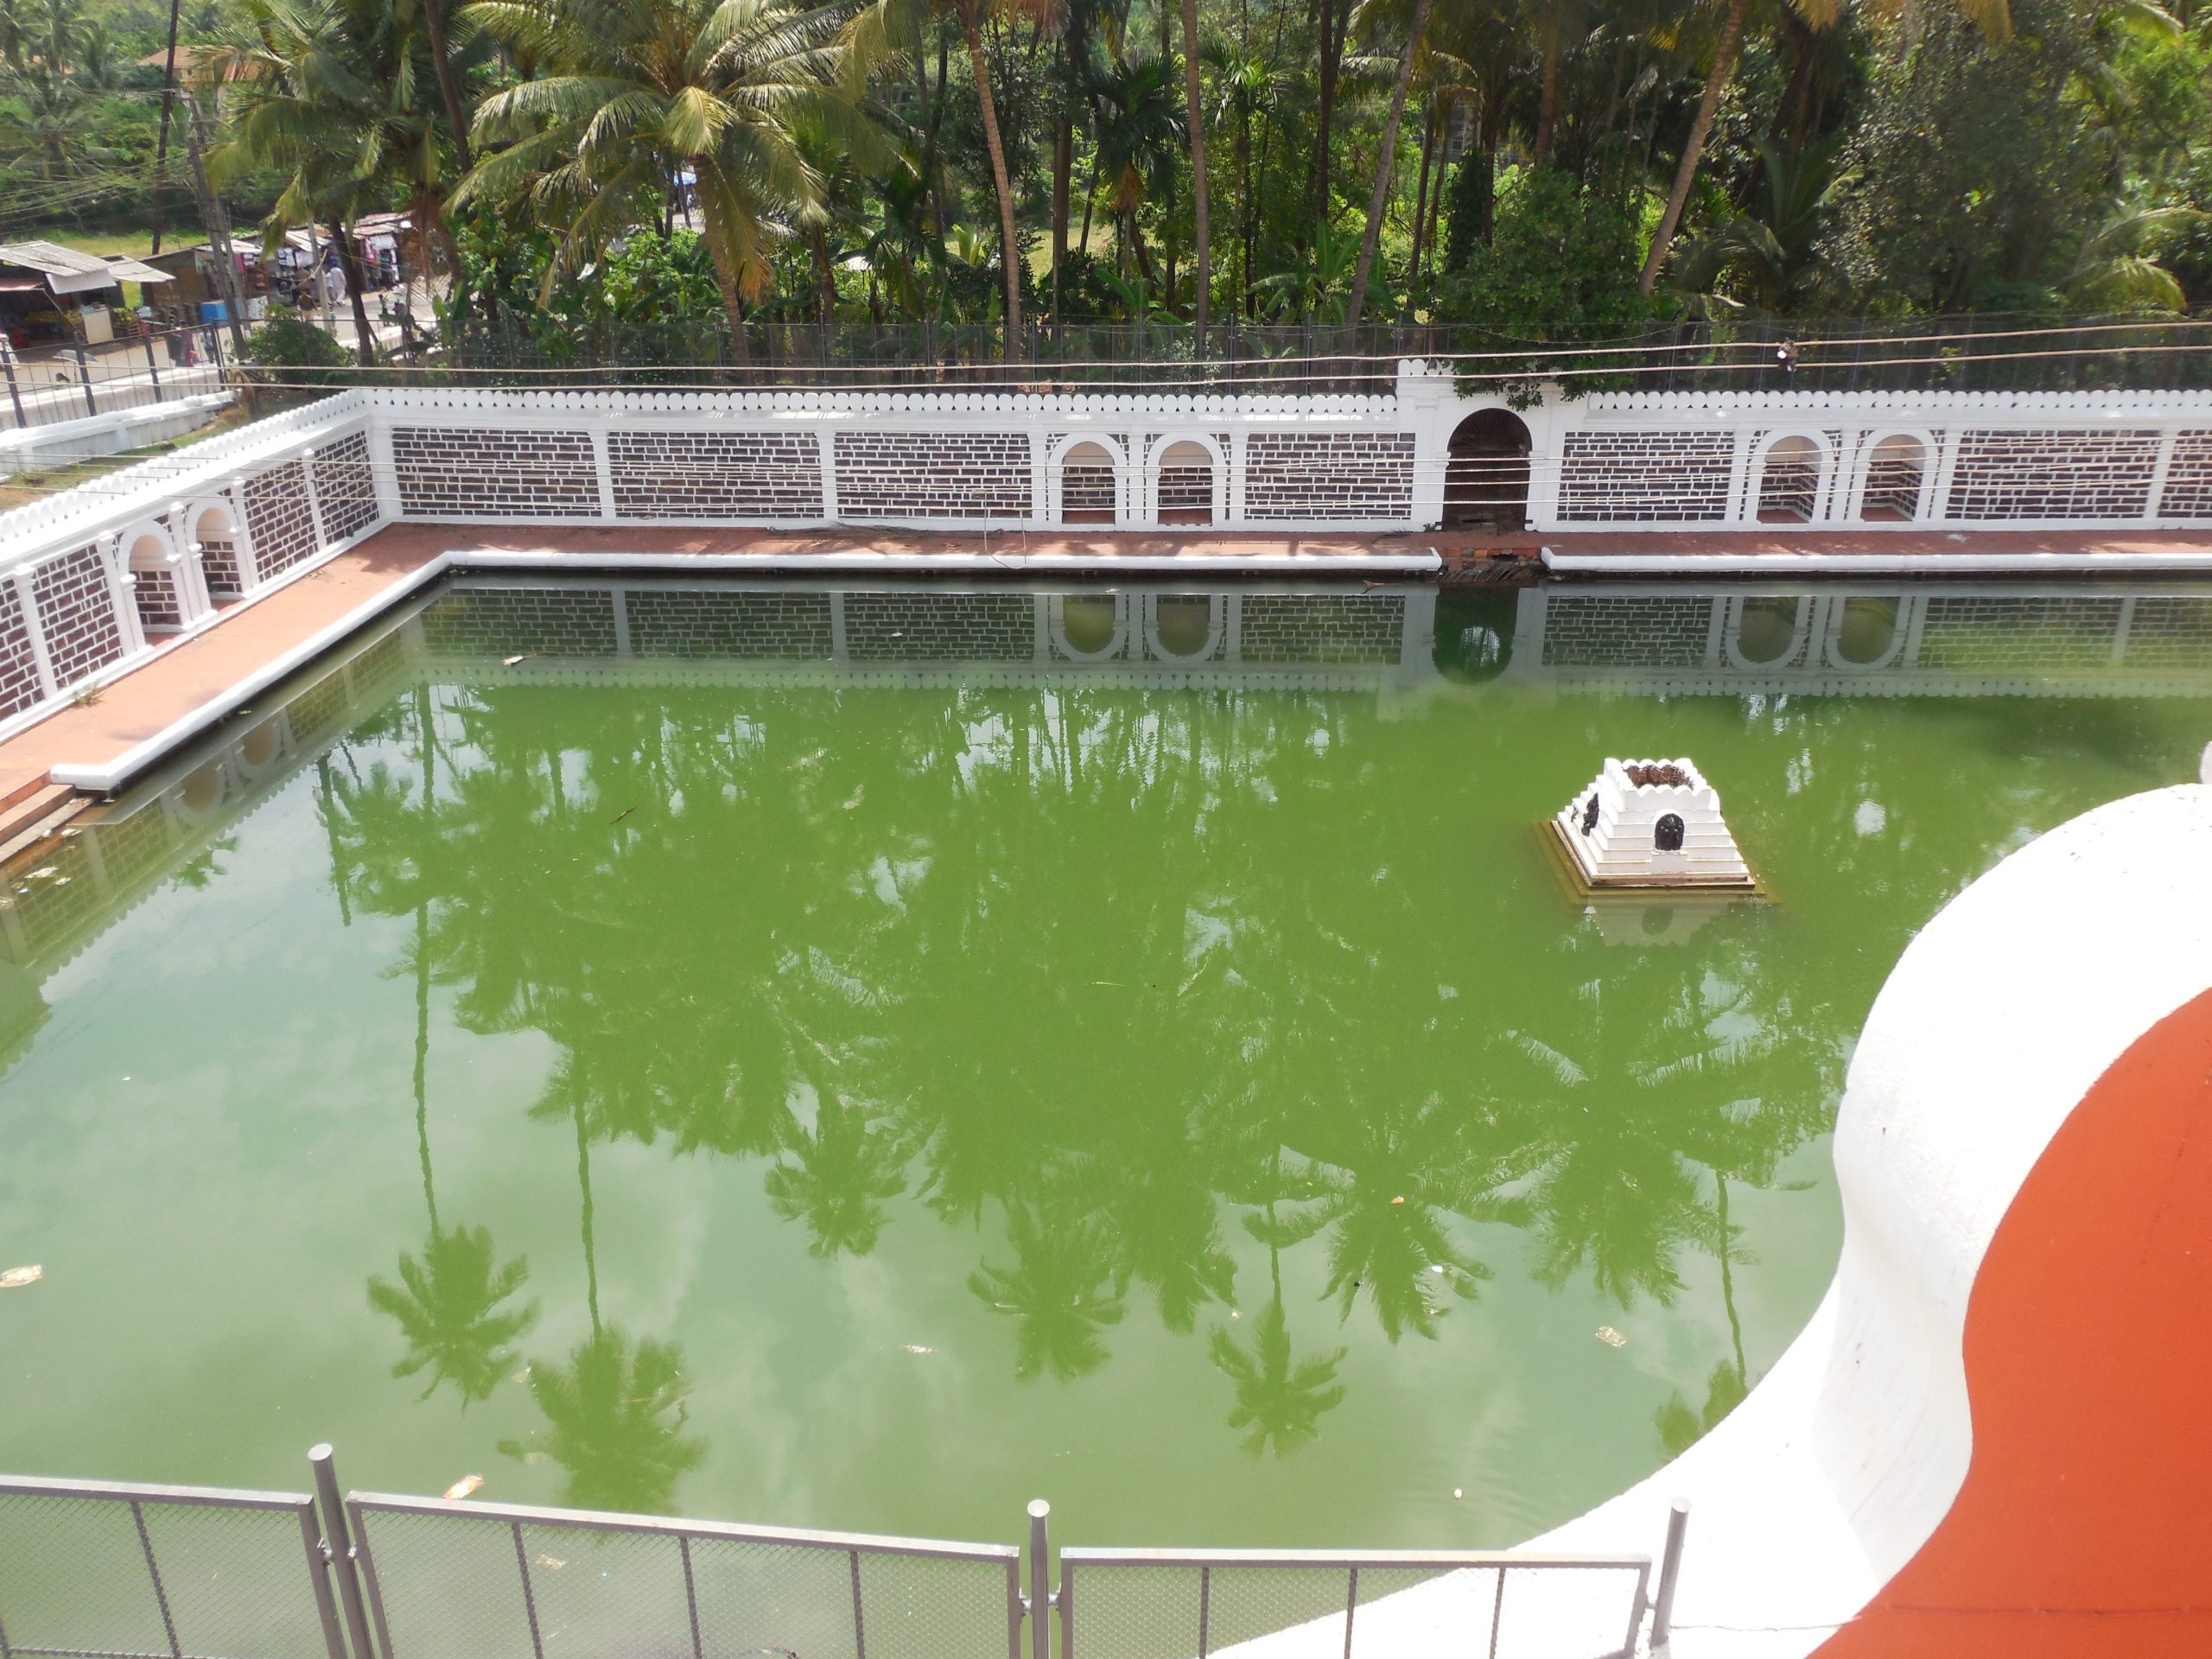 A pond in Mangeshi temple in Goa